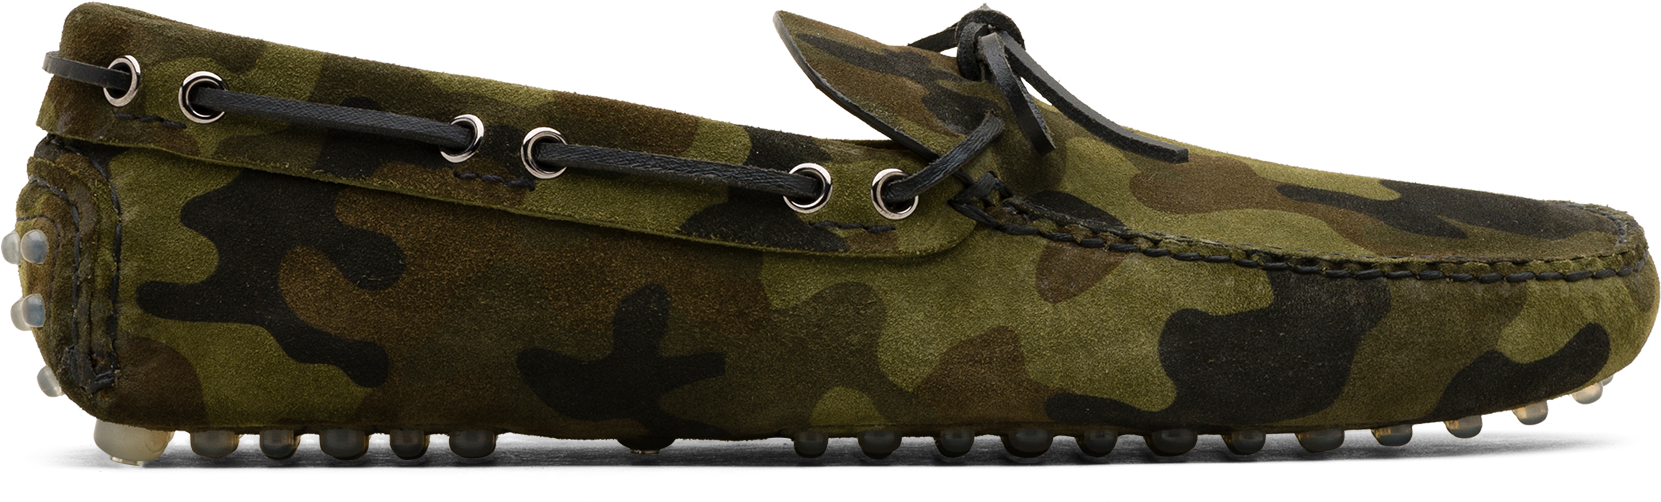 Driving Shoes Camouflage Printed Suede - Slip-on Shoe (1971x1755), Png Download